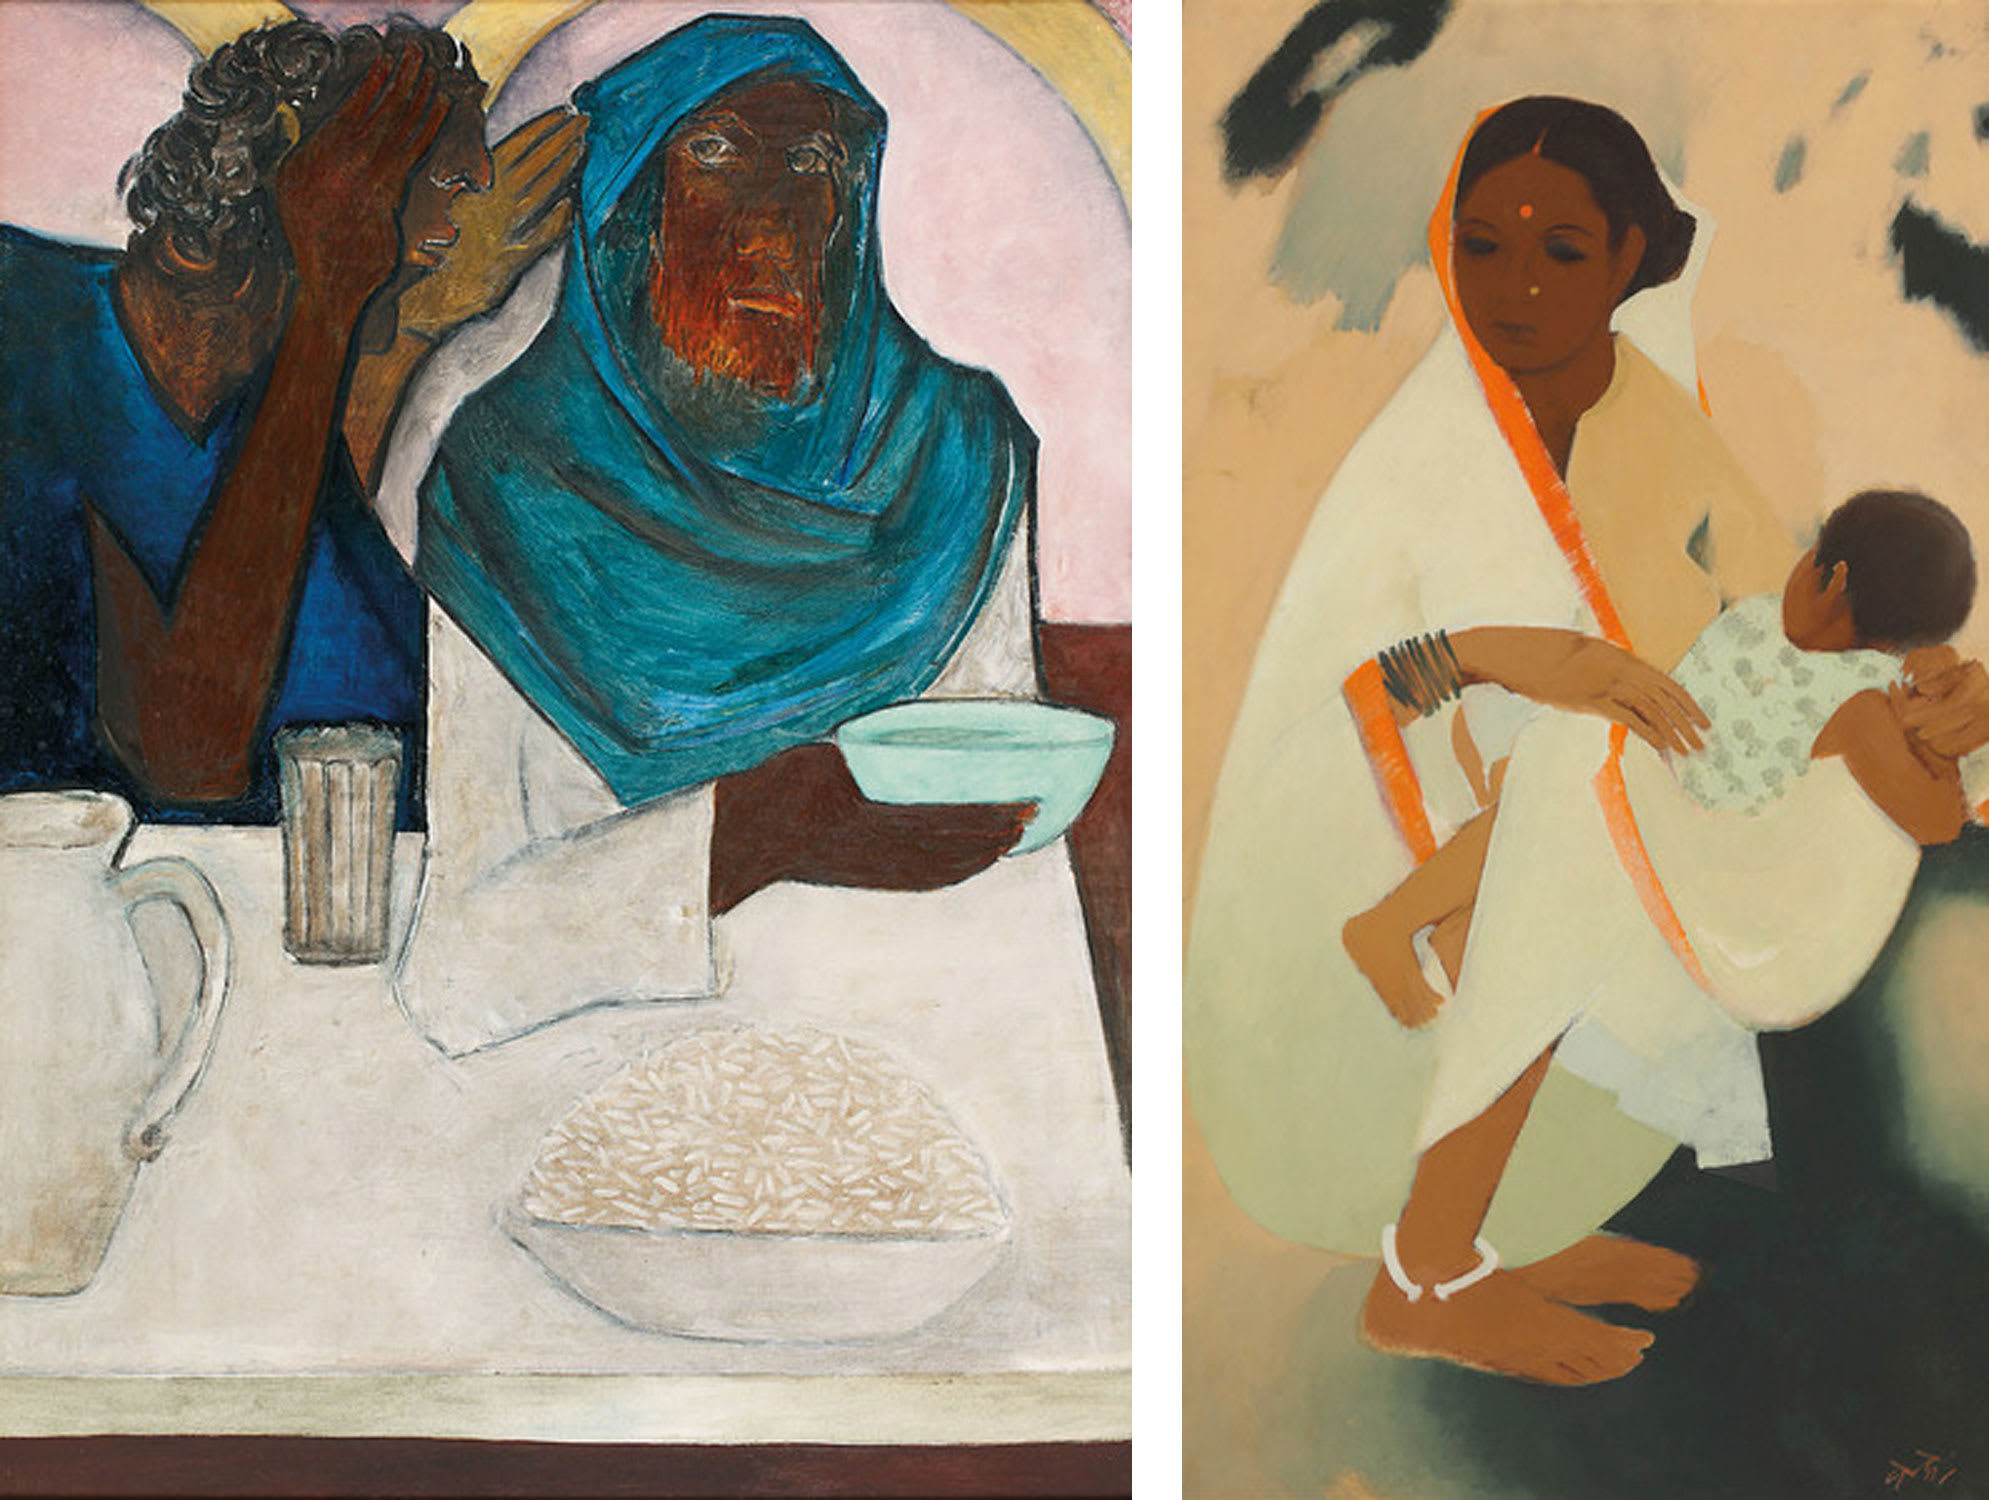 Left: Krishen Khanna, Who is it?, n.d. Right: N.S. Bendre, Untitled (Mother and Child), n.d. Khanna was a Mumbai’s Progressive Artists Group, while Bendre was part of the Baroda group. Both works were presented by DAG Gallery at Art Basel Hong Kong 2015.